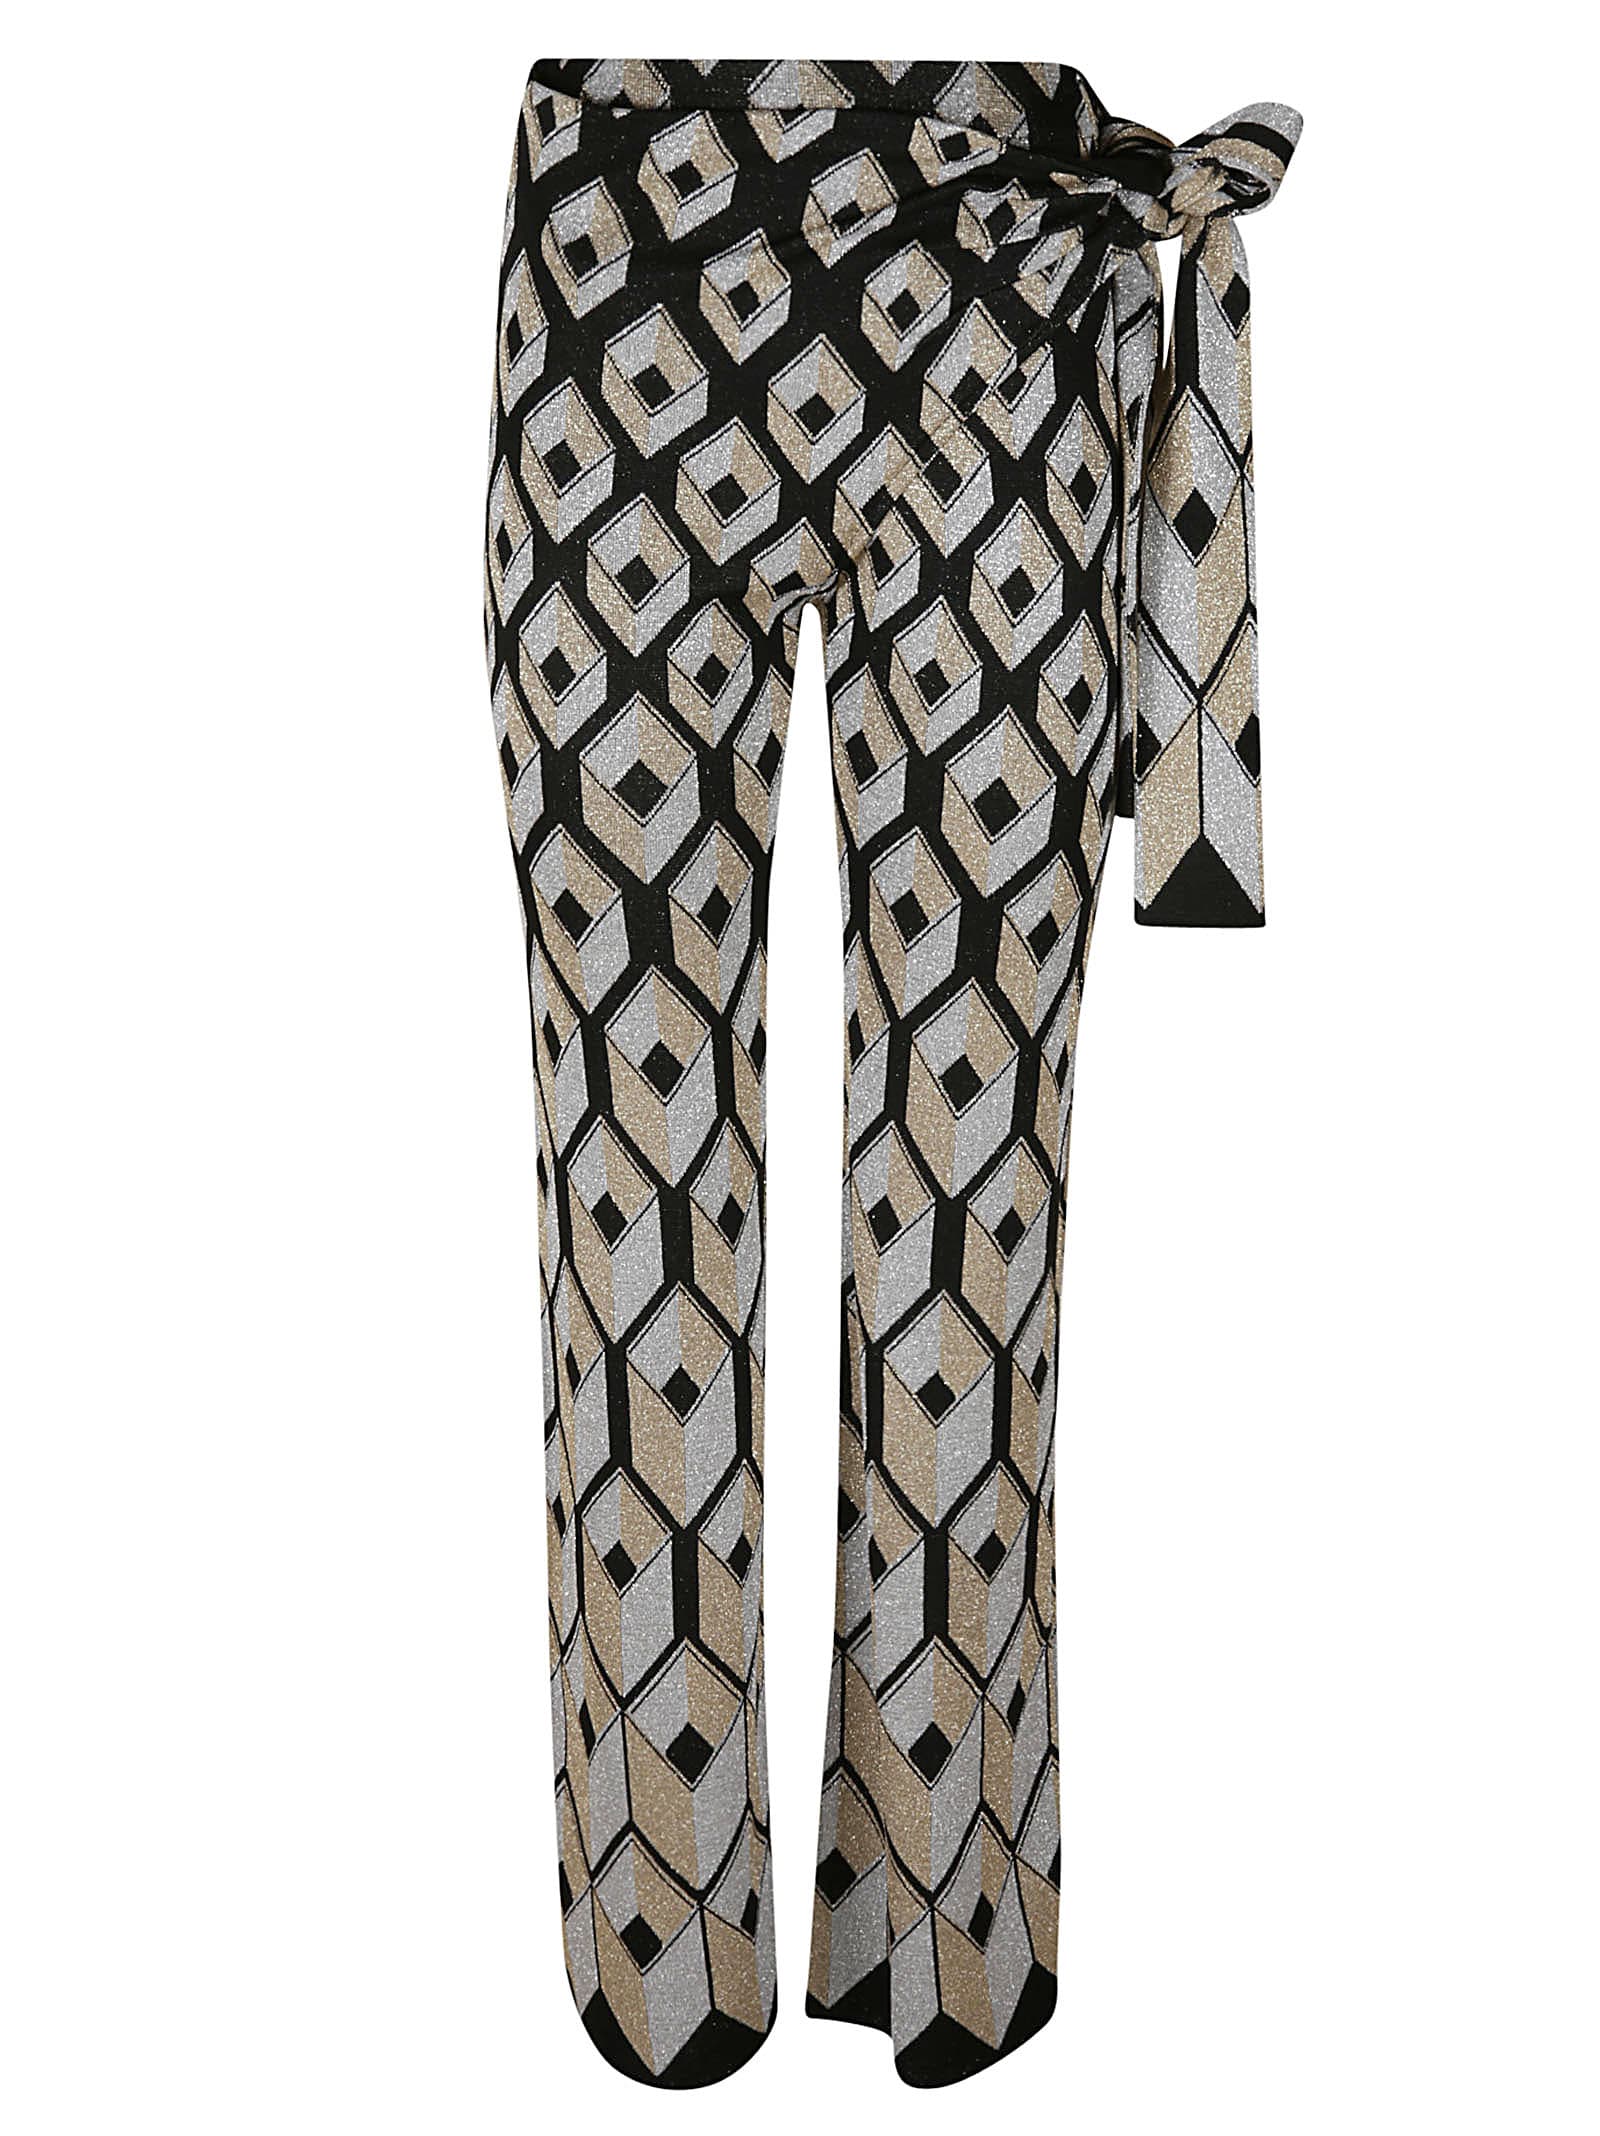 Paco Rabanne All-over Print Side-tie Trousers